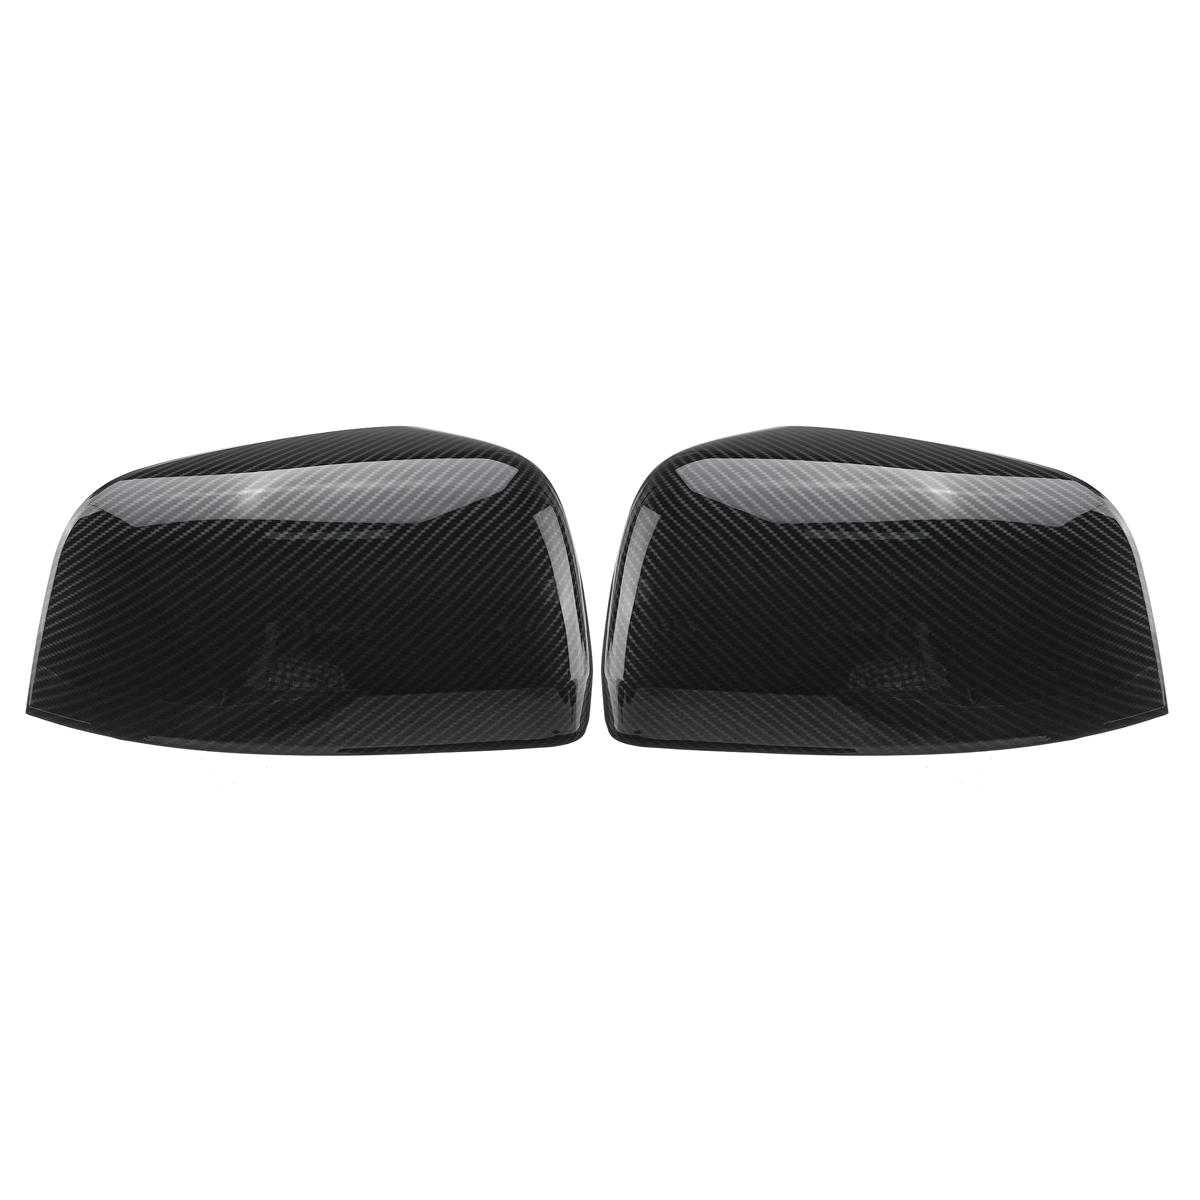 Pair Carbon Black Car Wing Side Rearview Mirror Cover for Jeep Grand Cherokee 2011-2017